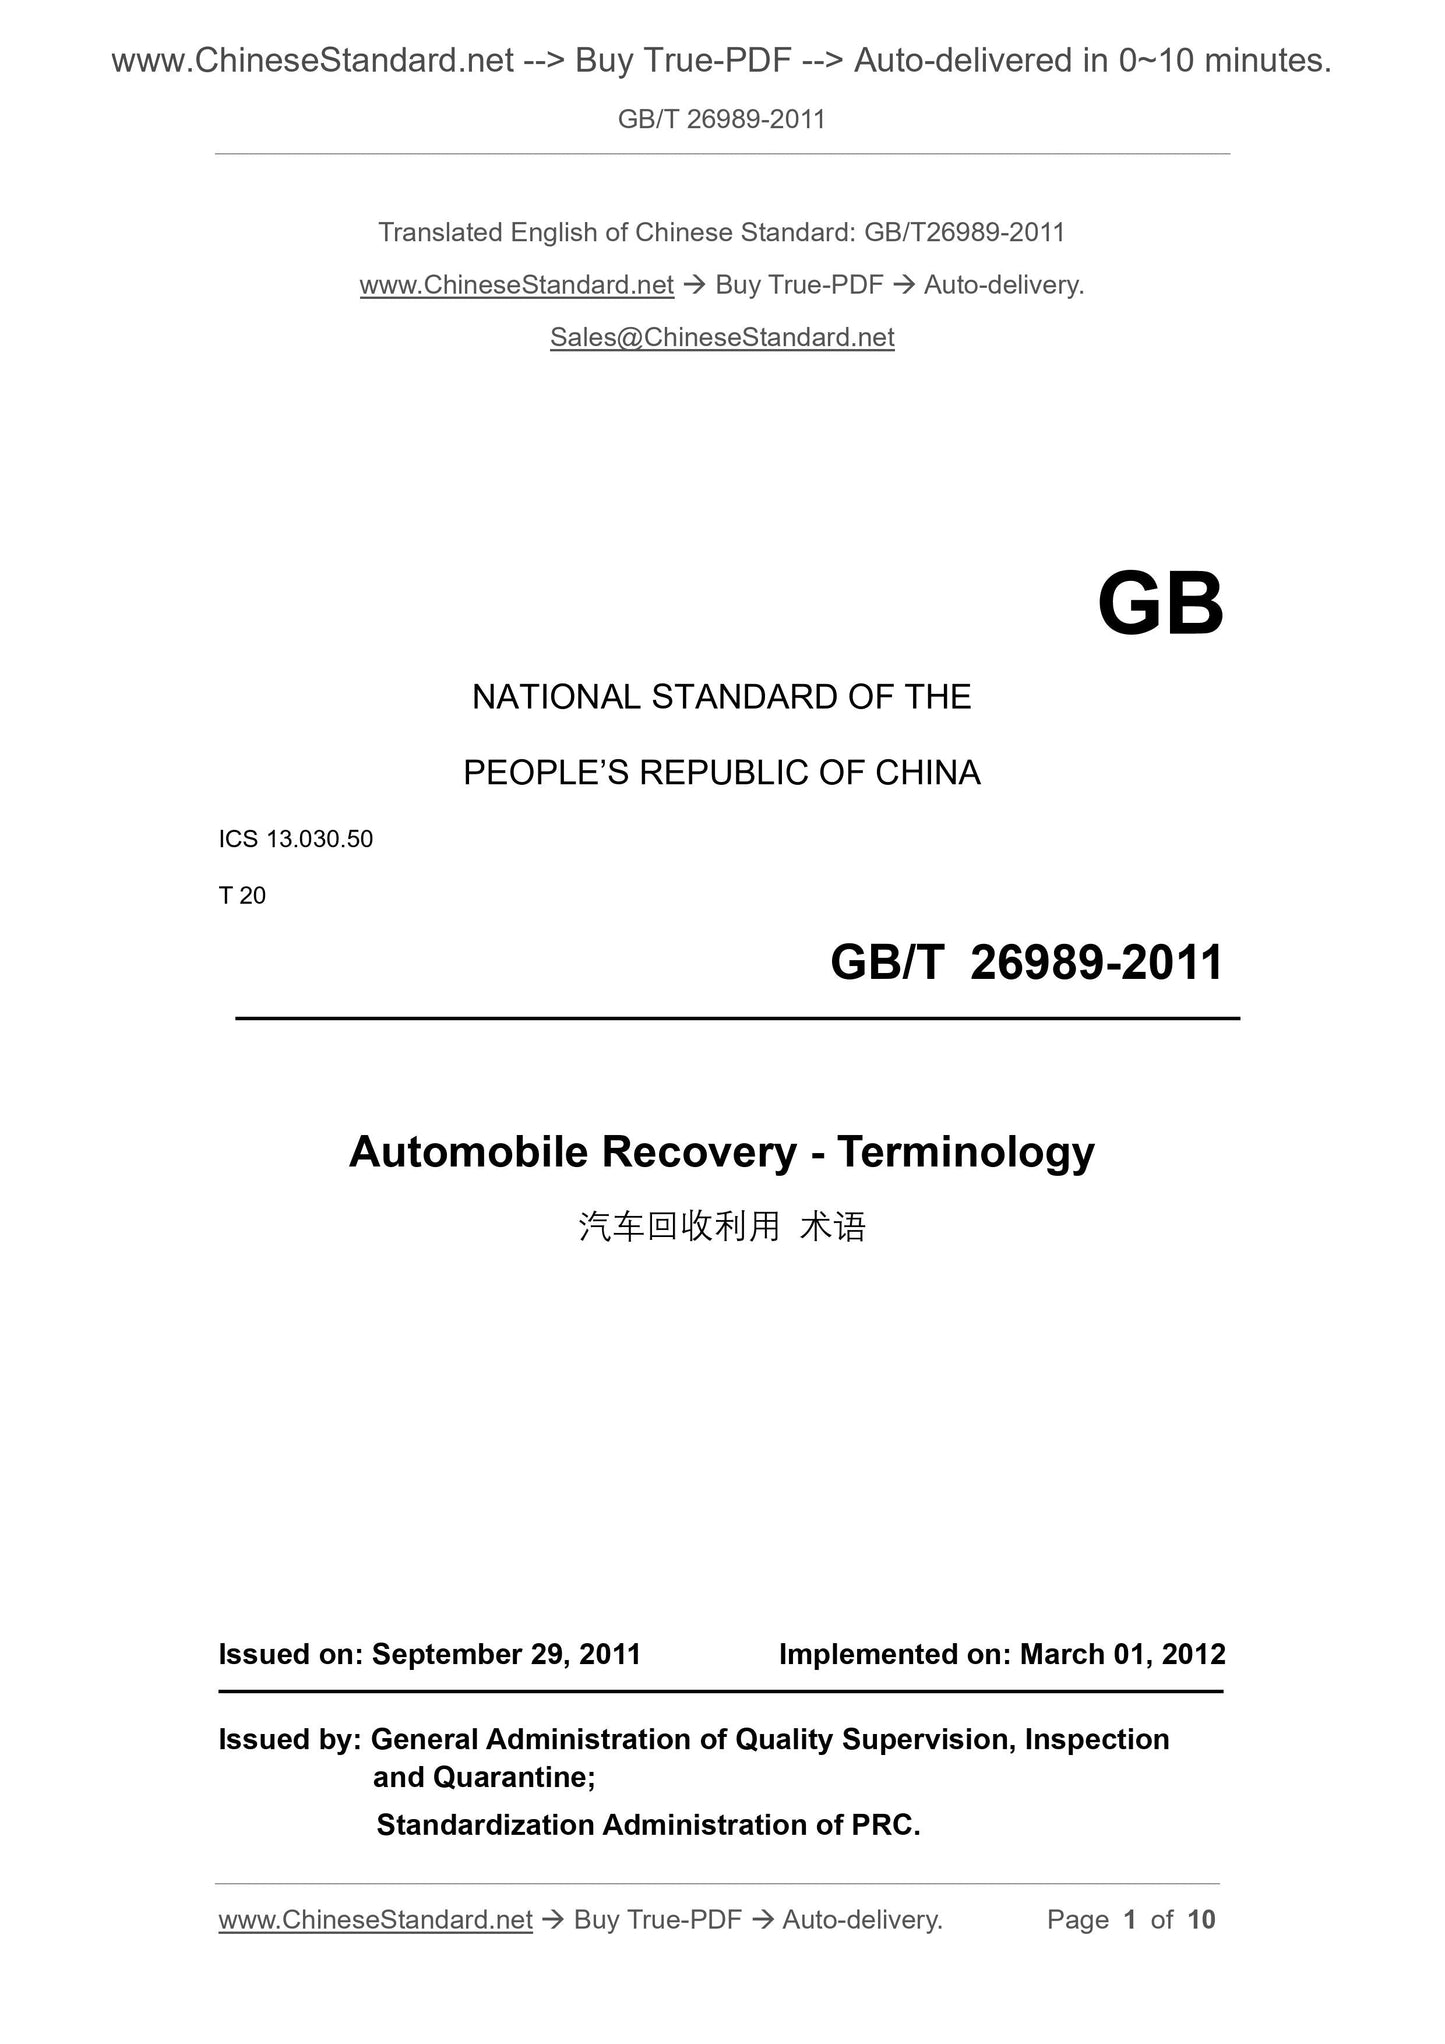 GB/T 26989-2011 Page 1